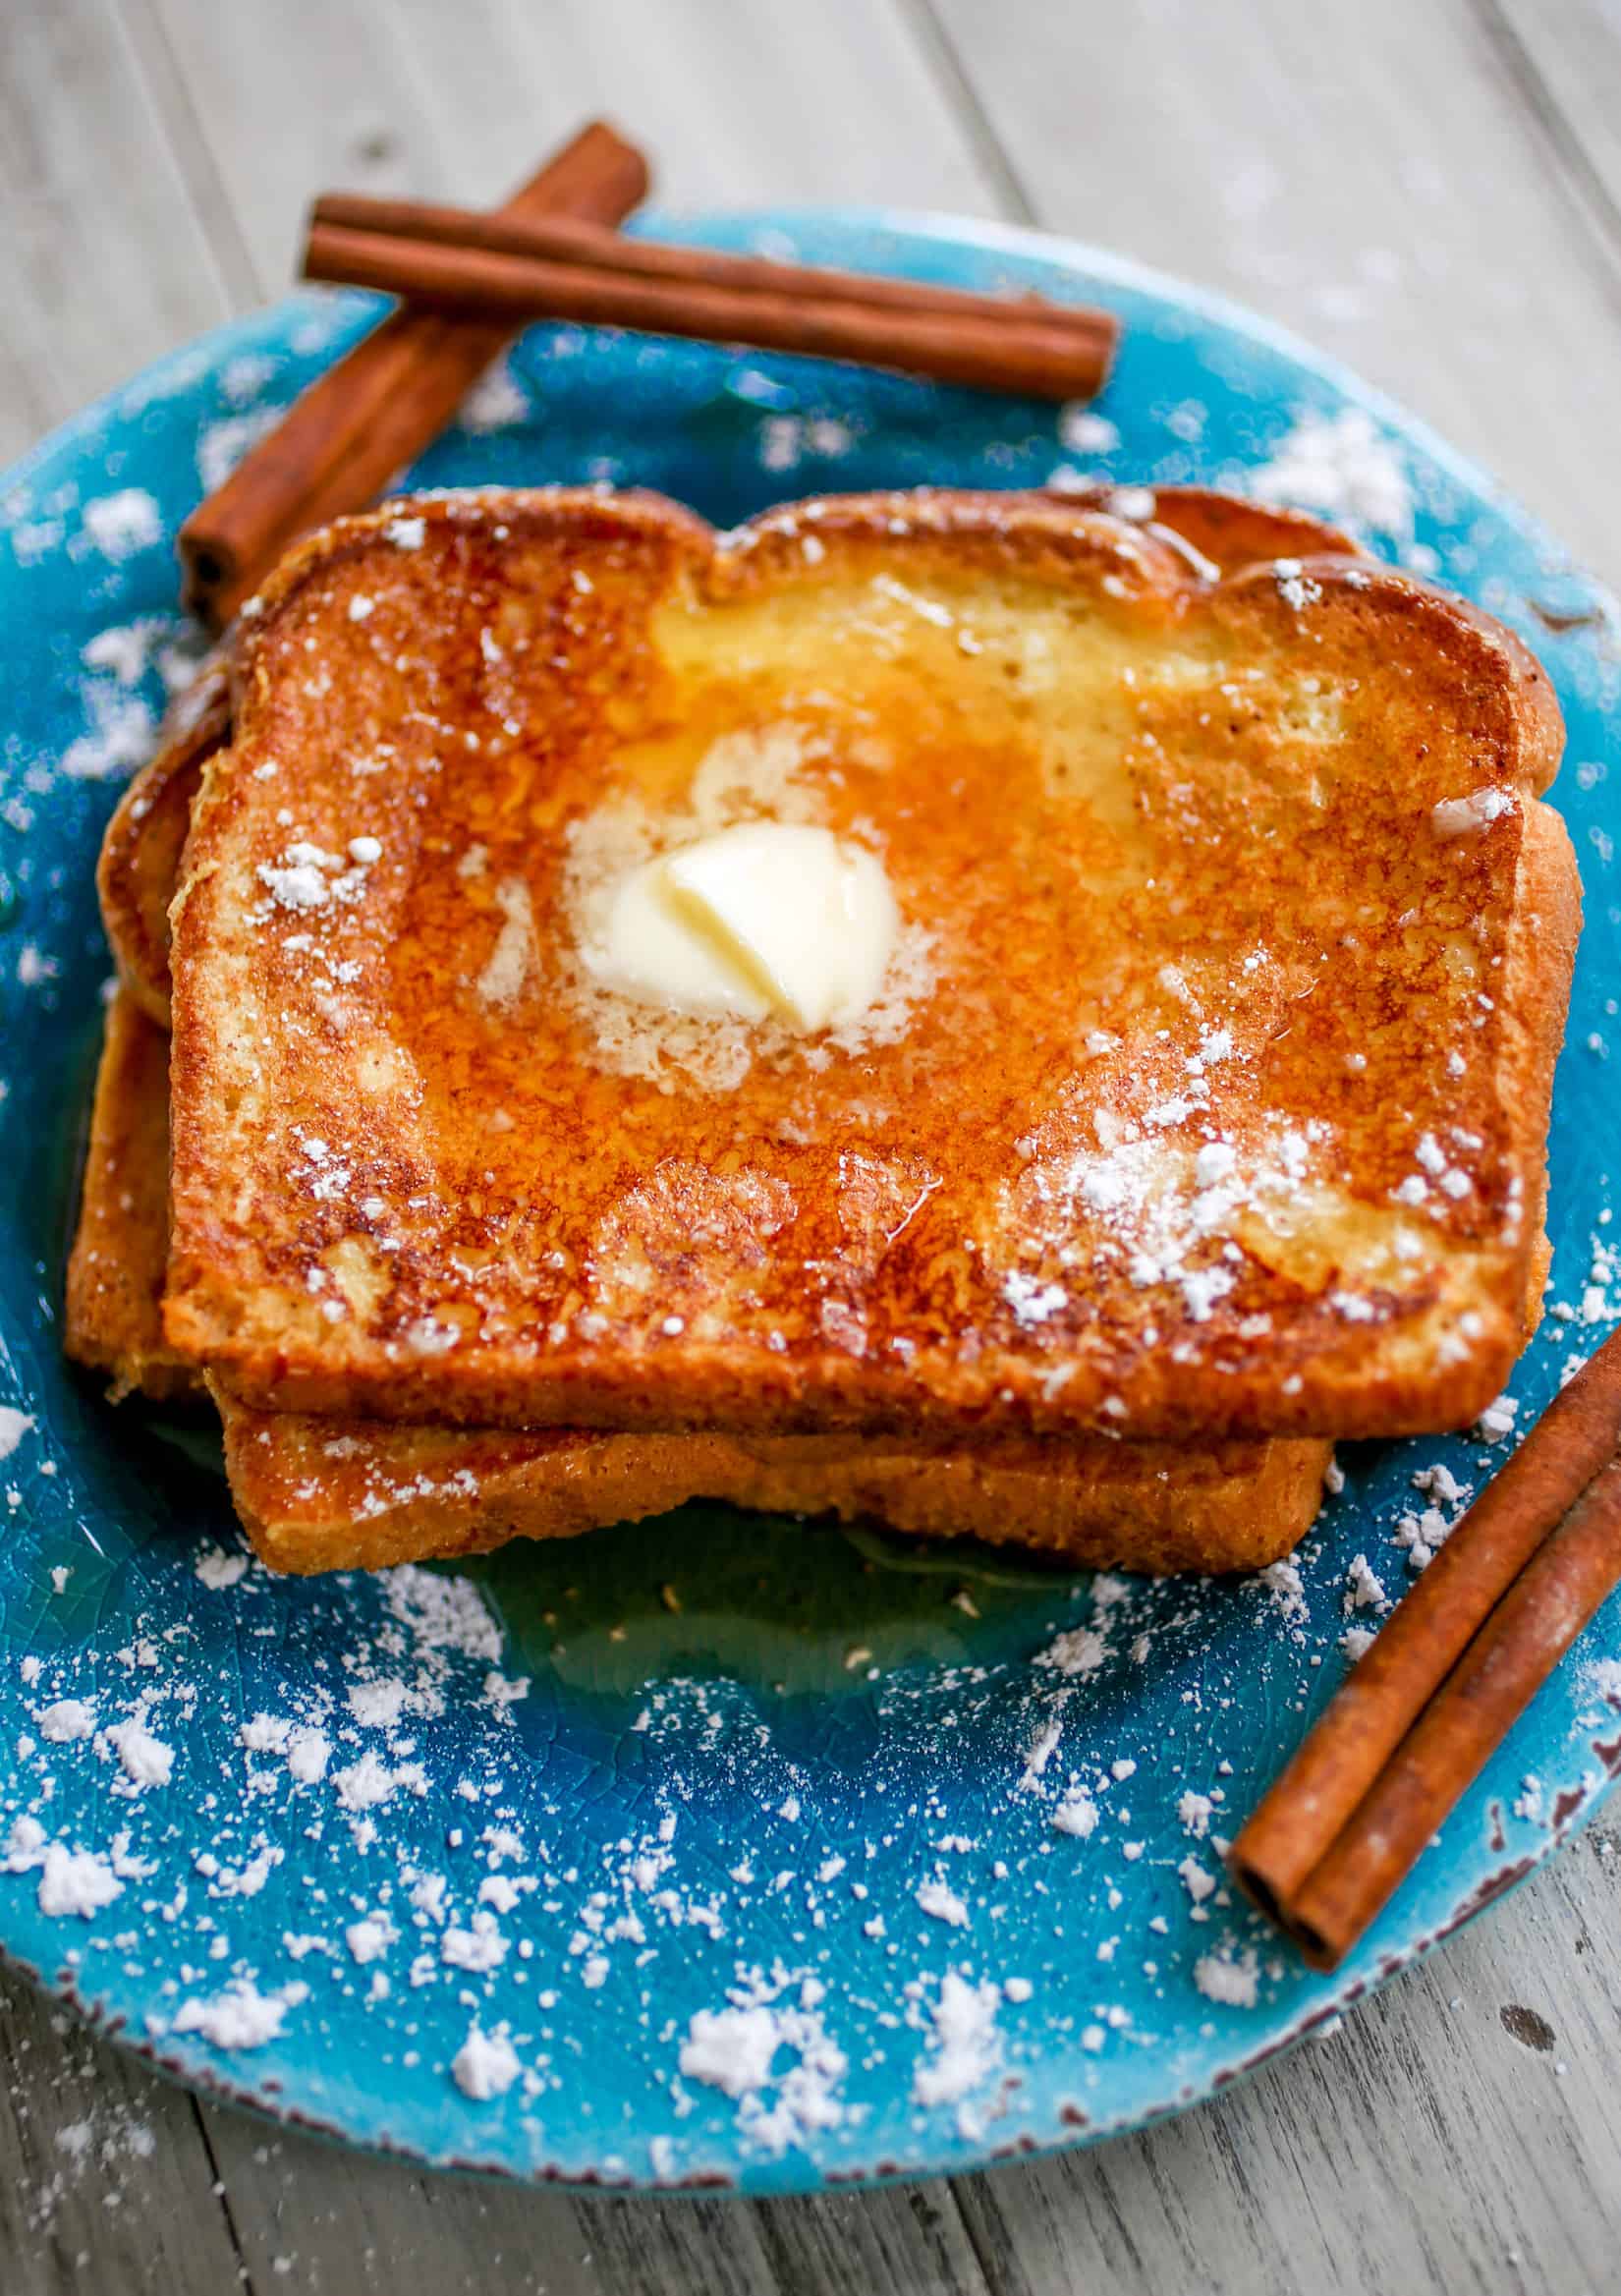 Eggnog French toast stacked on a blue plate.